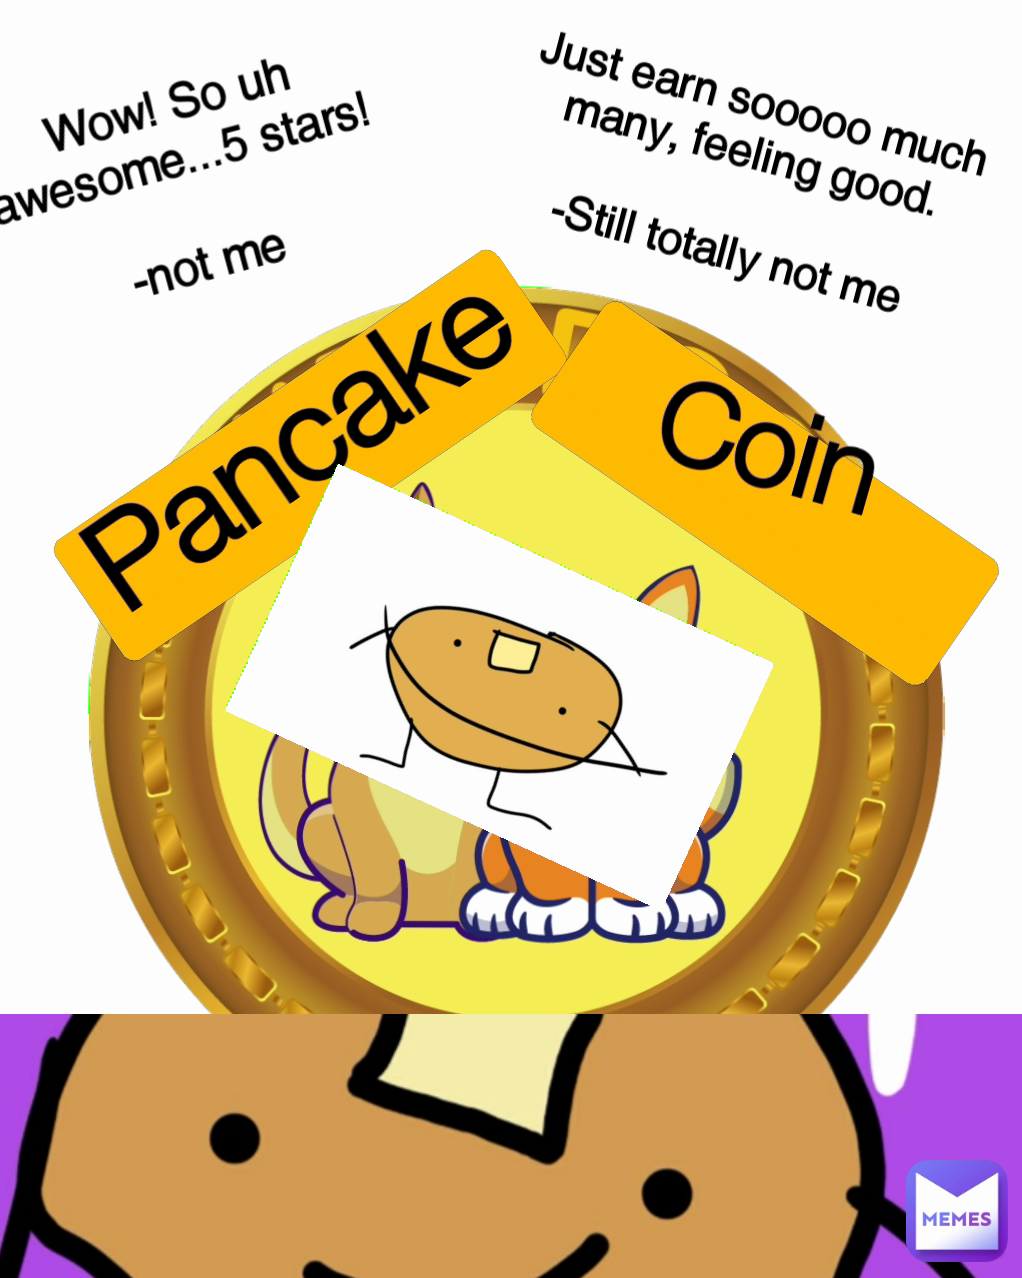 ................   Pancake
 ............... Just earn sooooo much many, feeling good.

-Still totally not me 
Wow! So uh awesome...5 stars!

-not me Coin